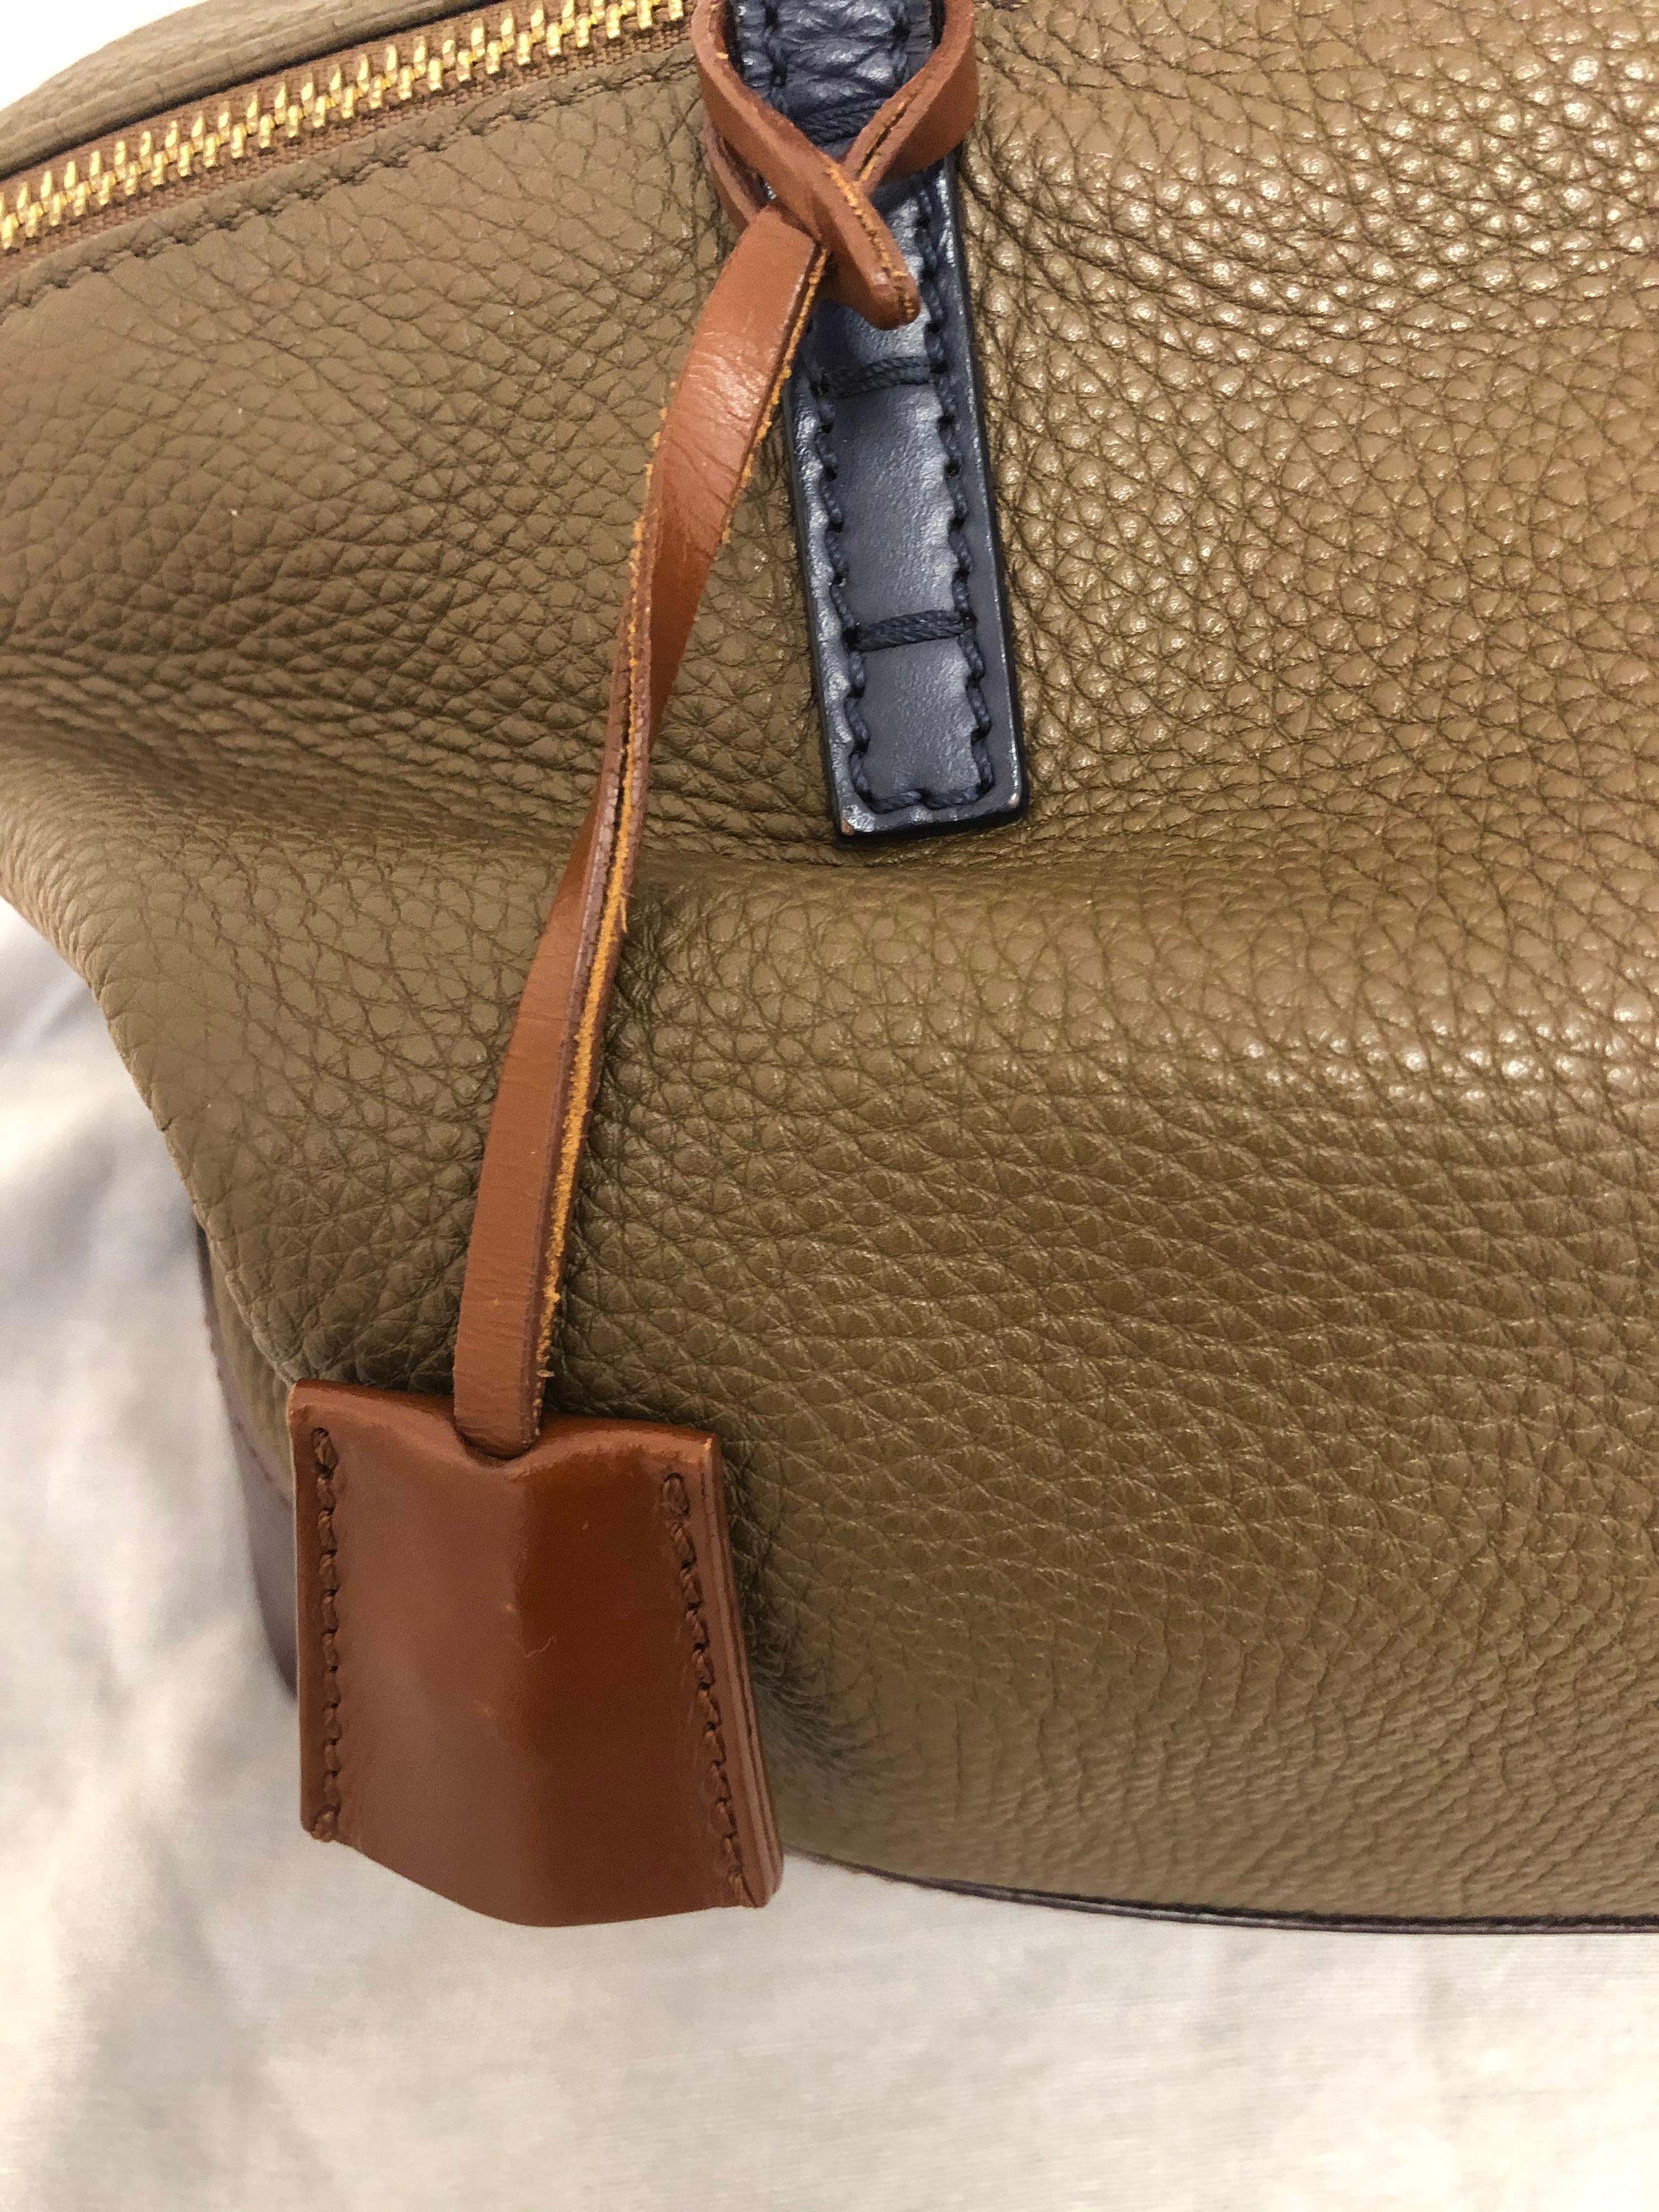 This 2011 Fendi Tri-Color 2Bag is very well made in three colors of leather (beige, brown and purple), and very versatile. The condition is very good except for rubbing on some of the bottom edge corners (shown in pictures). The inside is very clean